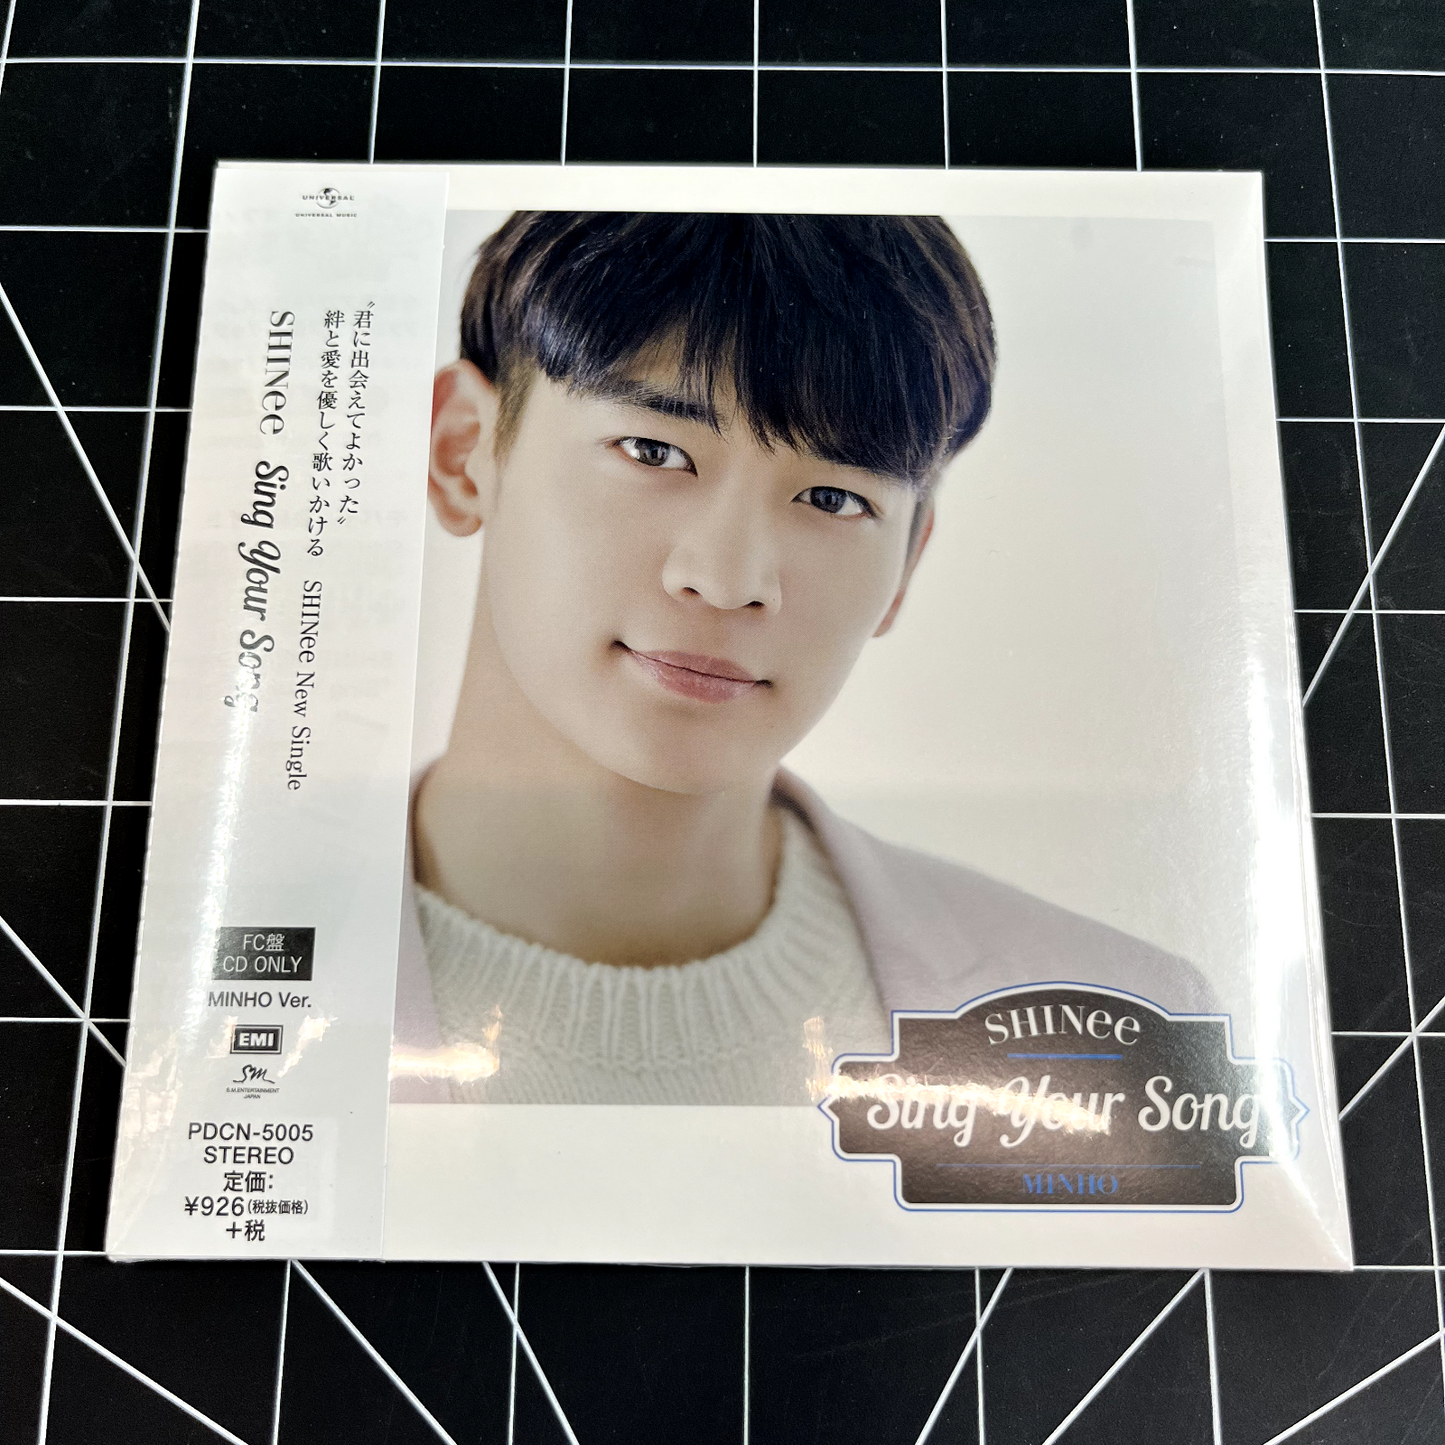 SHINee Sing Your Song Japan CD (FC Limited Edition) - Minho Version